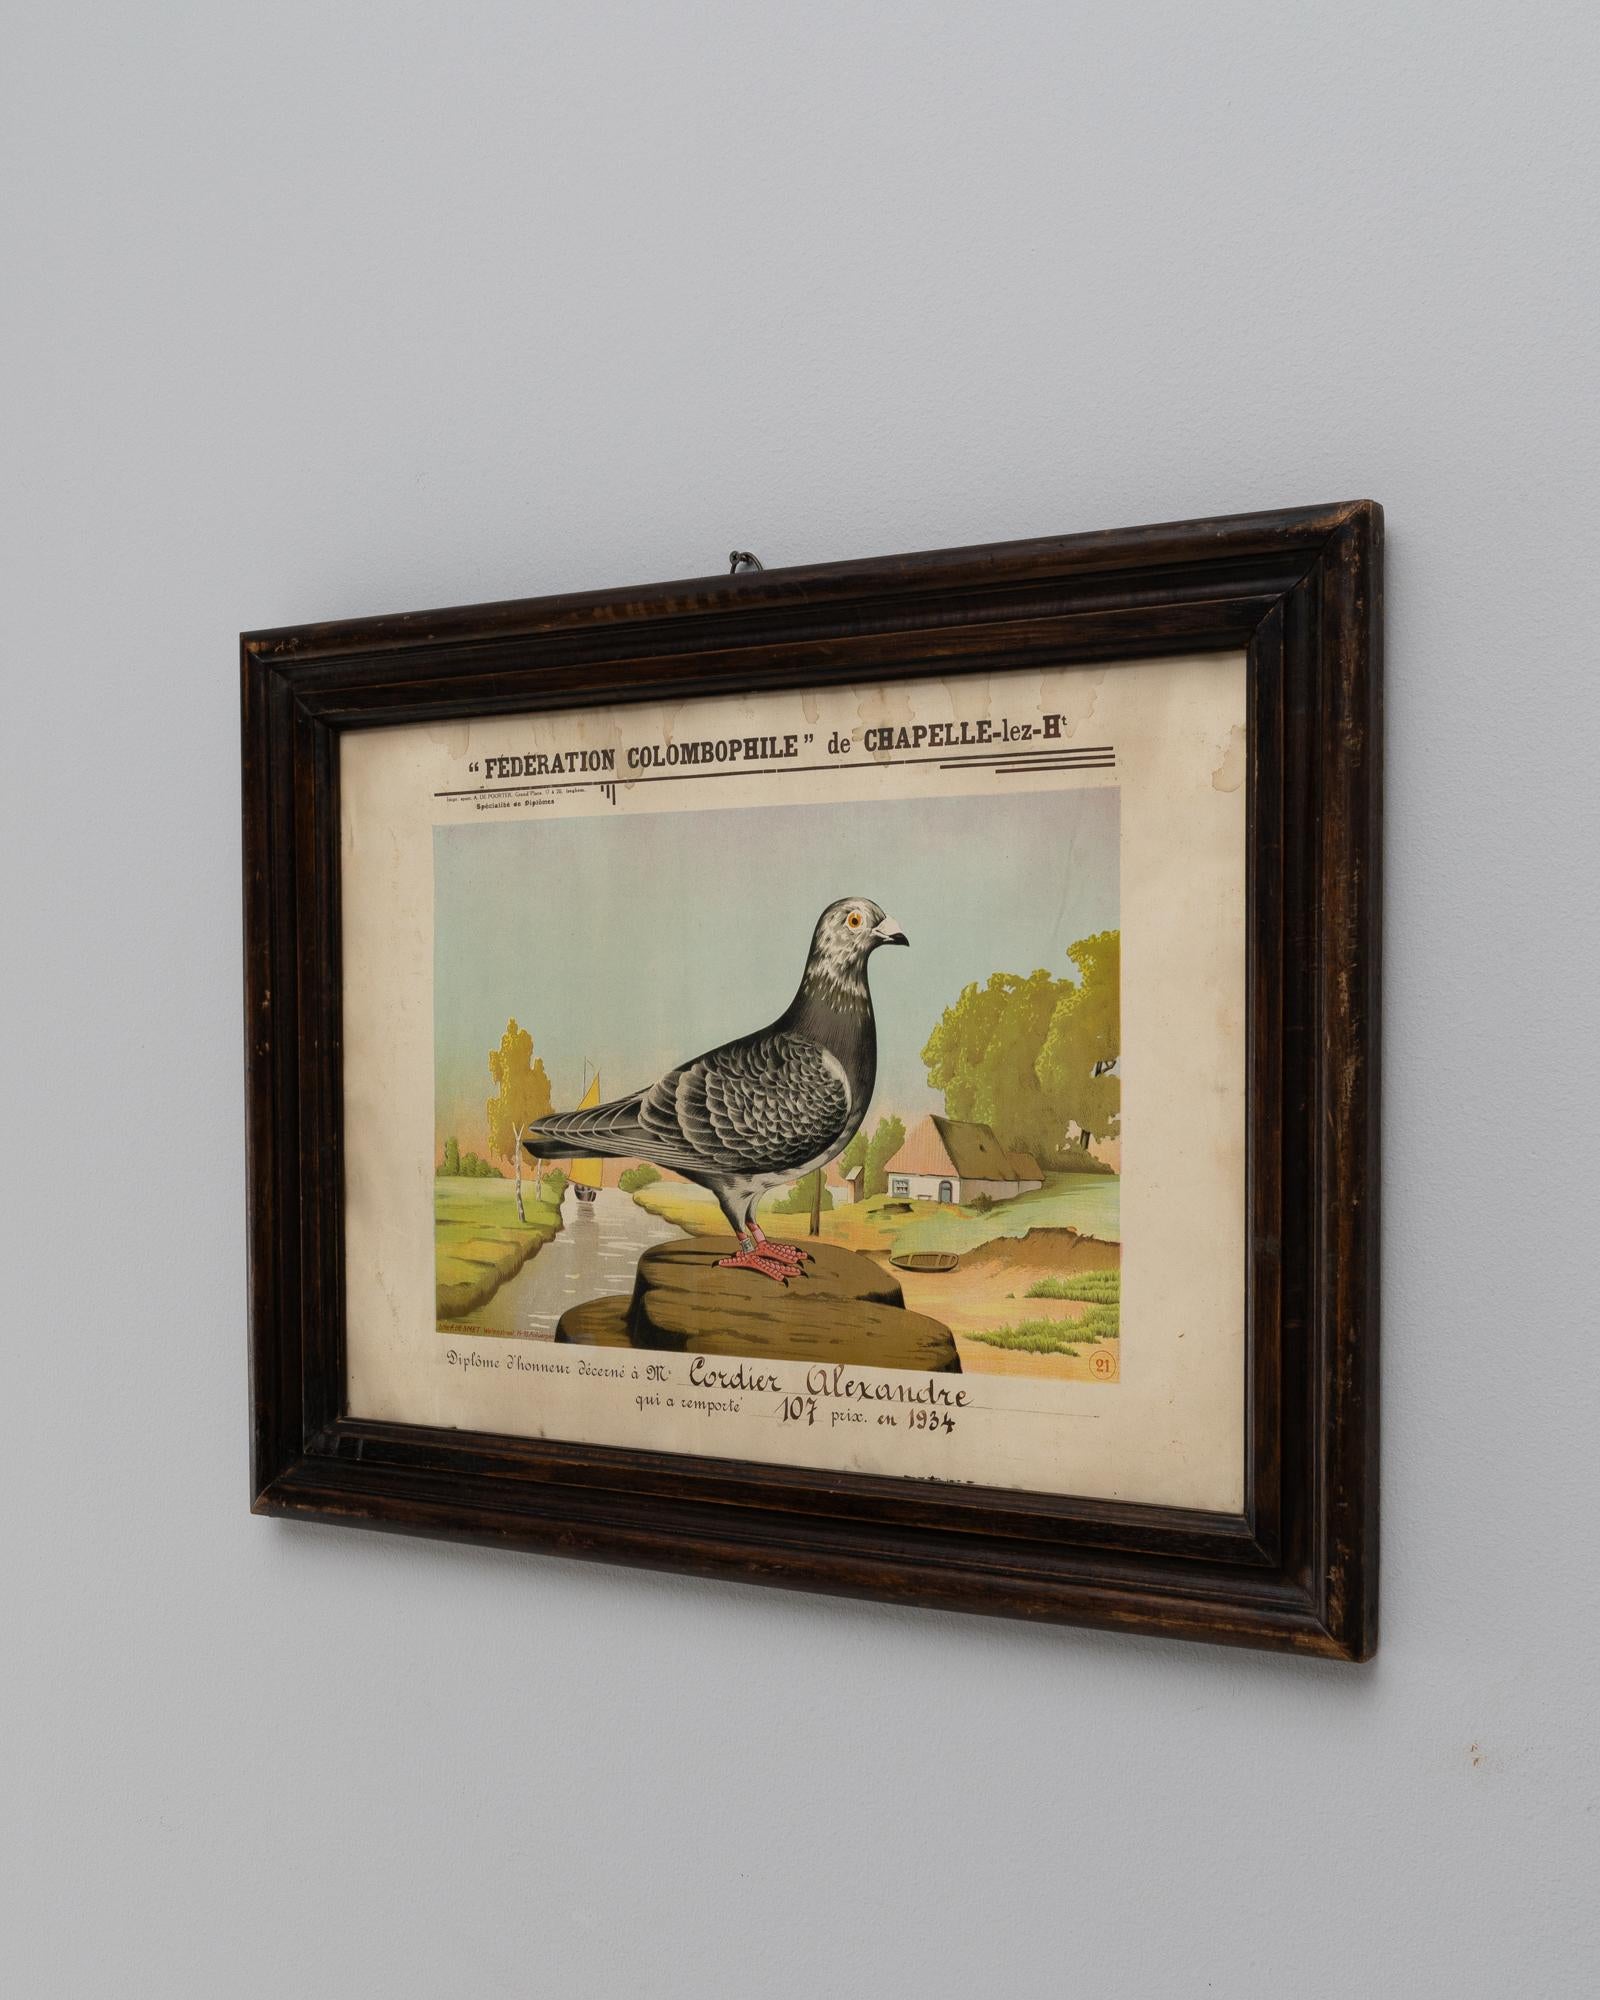 This 20th Century Belgian Artwork, housed in a classic wooden frame, is a delightful nod to the rich heritage of avian art. It features a detailed illustration of a proud pigeon, a species renowned for its homing ability and significance in